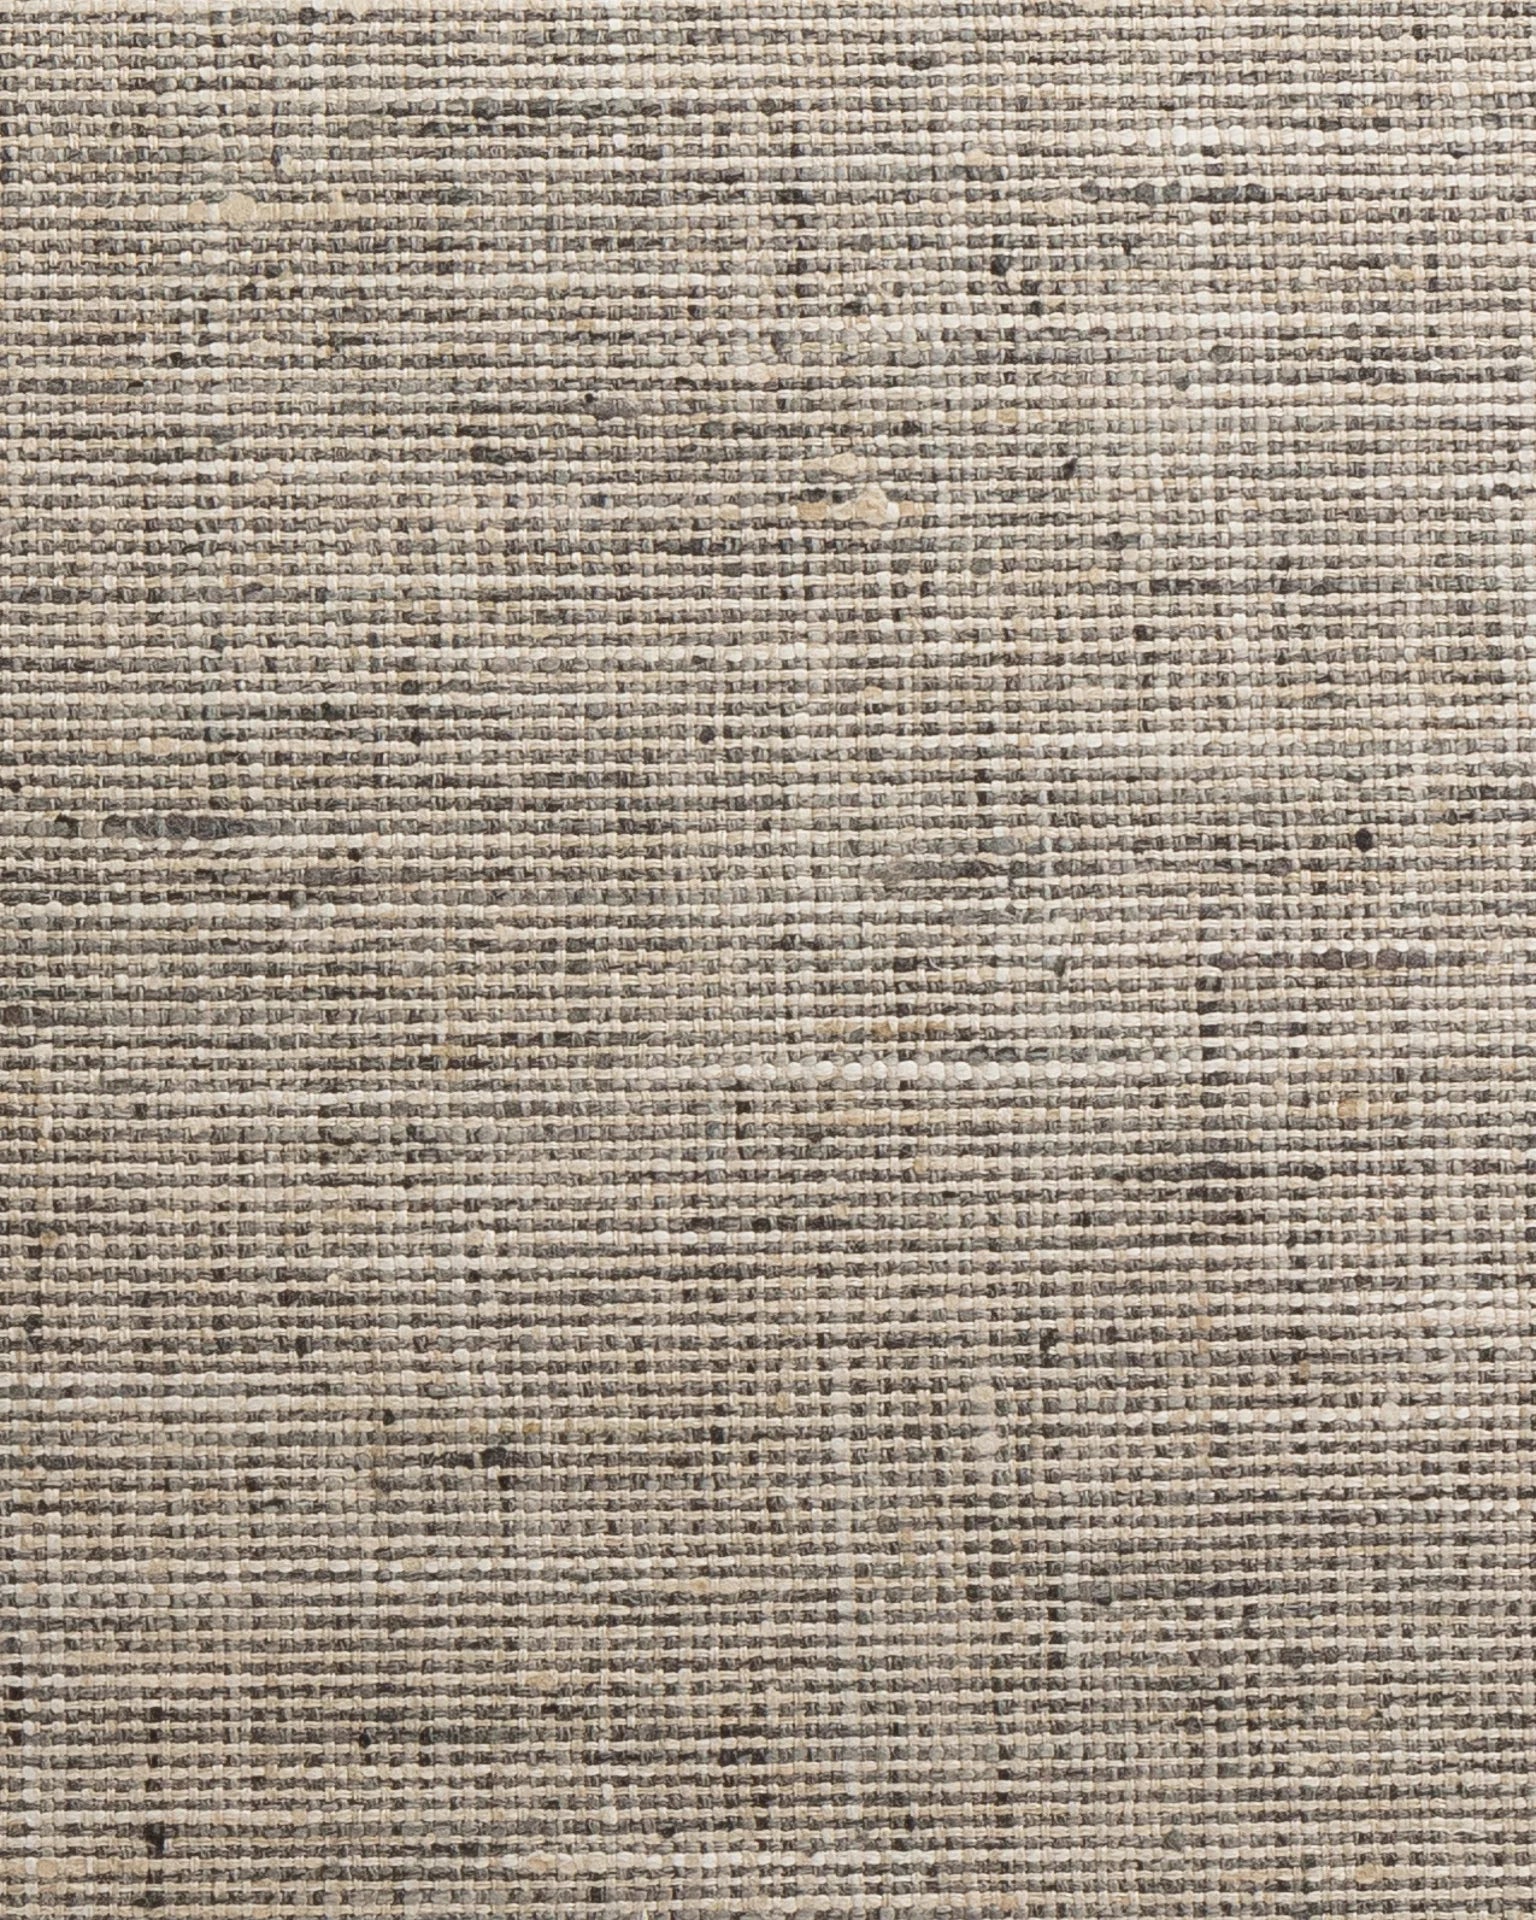 Close-up texture of a natural Grasscloth Steel fabric showing detailed woven fibers in neutral tones, typical of Scottsdale Arizona bungalow interiors by Gabby.